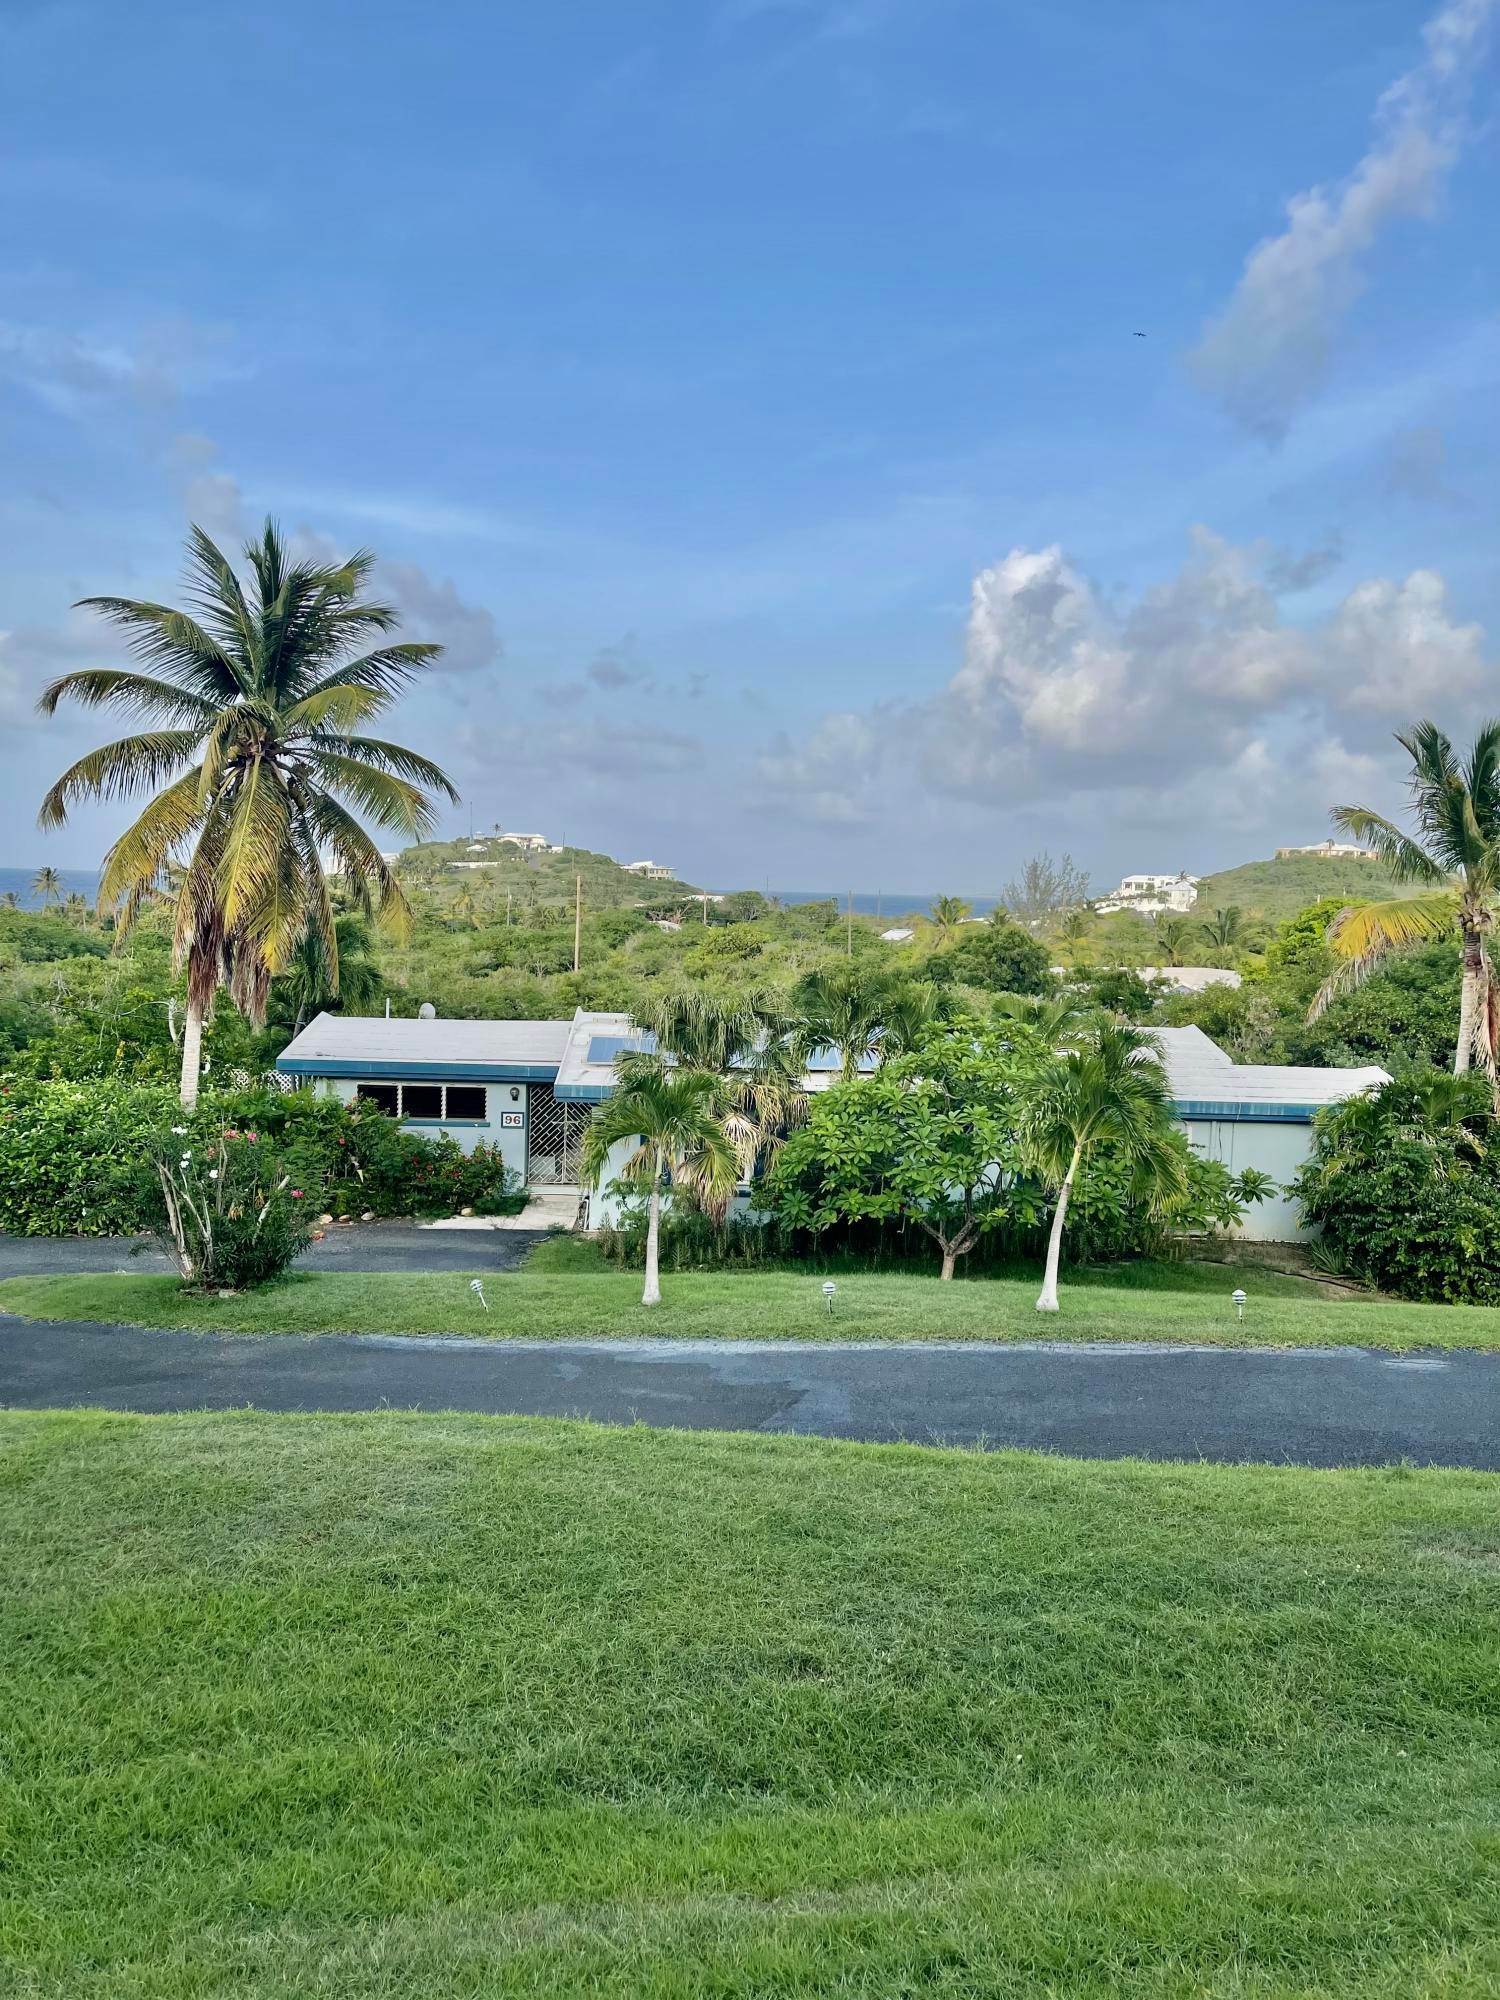 Single Family Homes for Sale at 96 Judith's Fancy QU St Croix, Virgin Islands 00820 United States Virgin Islands